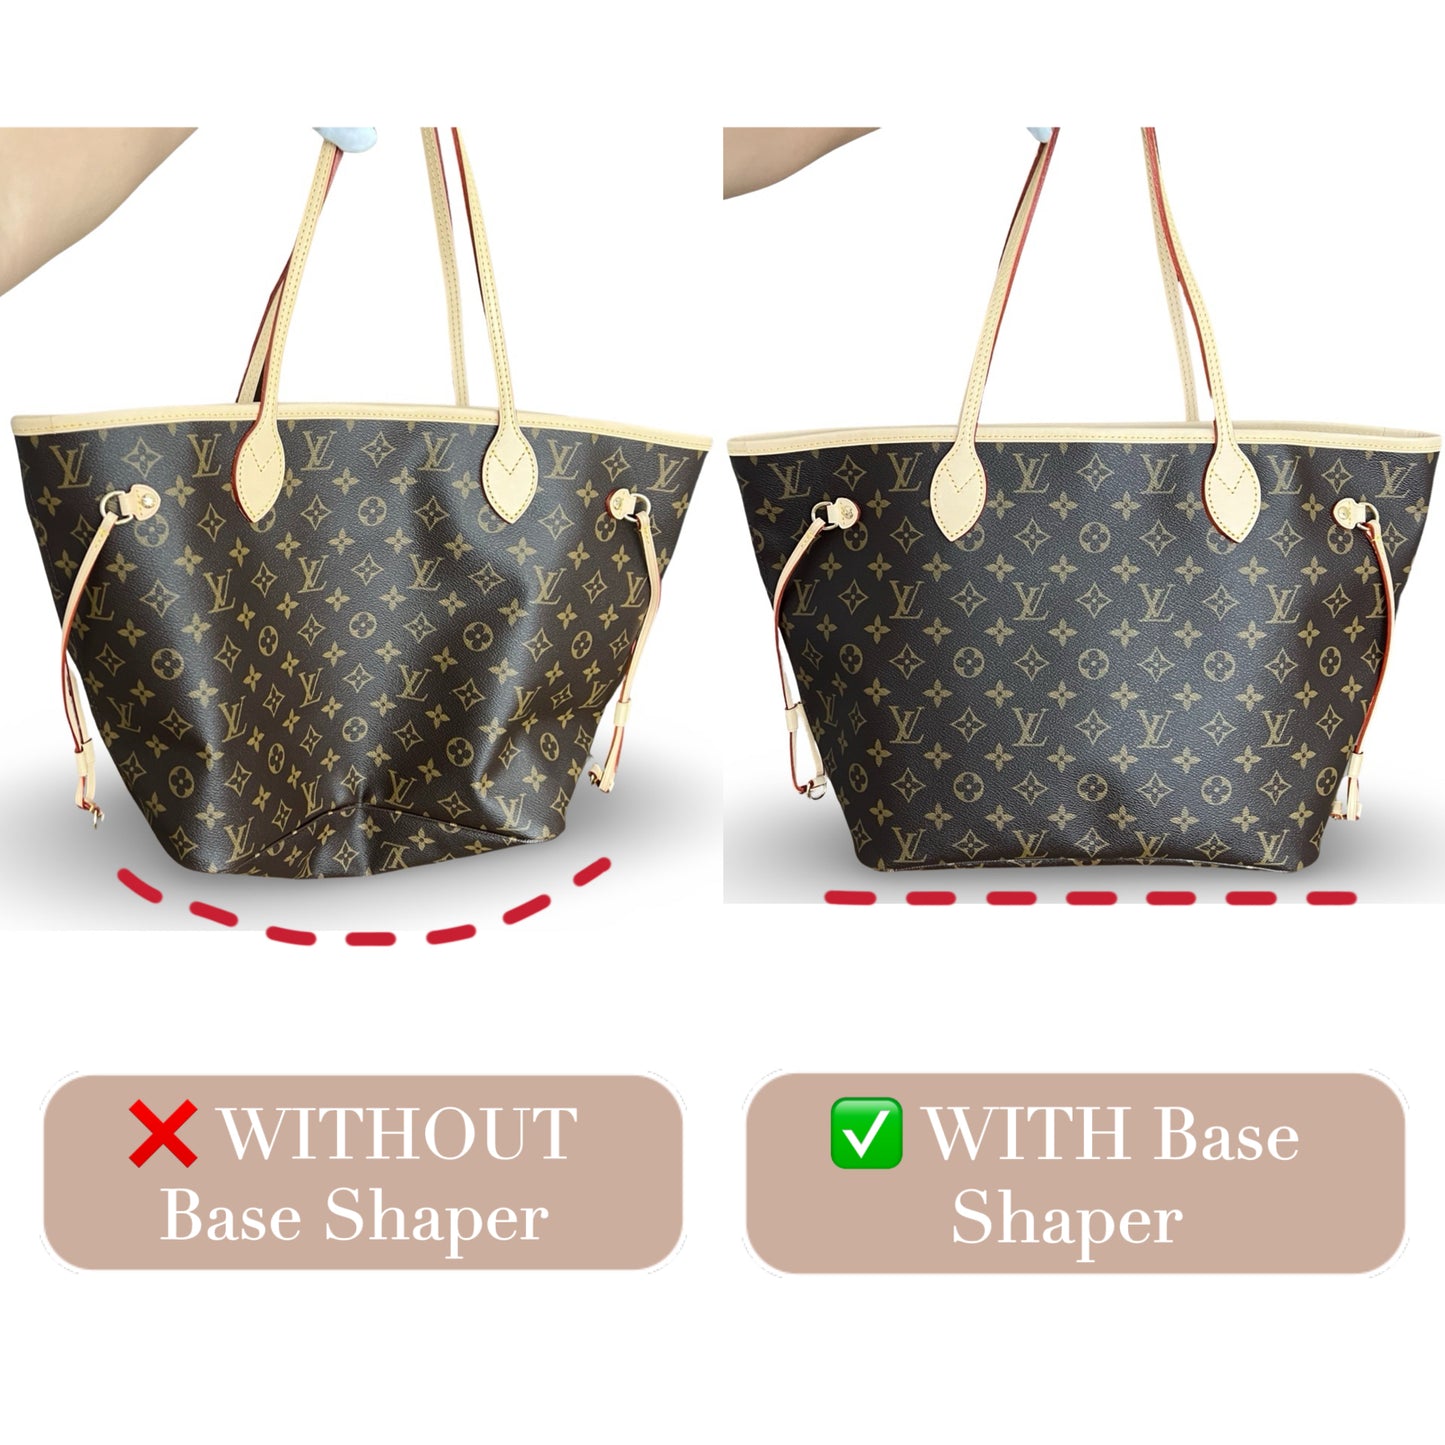 Base Shaper / Bag Insert Saver for Louis Vuitton Neverfull MM Tote Canvas Version